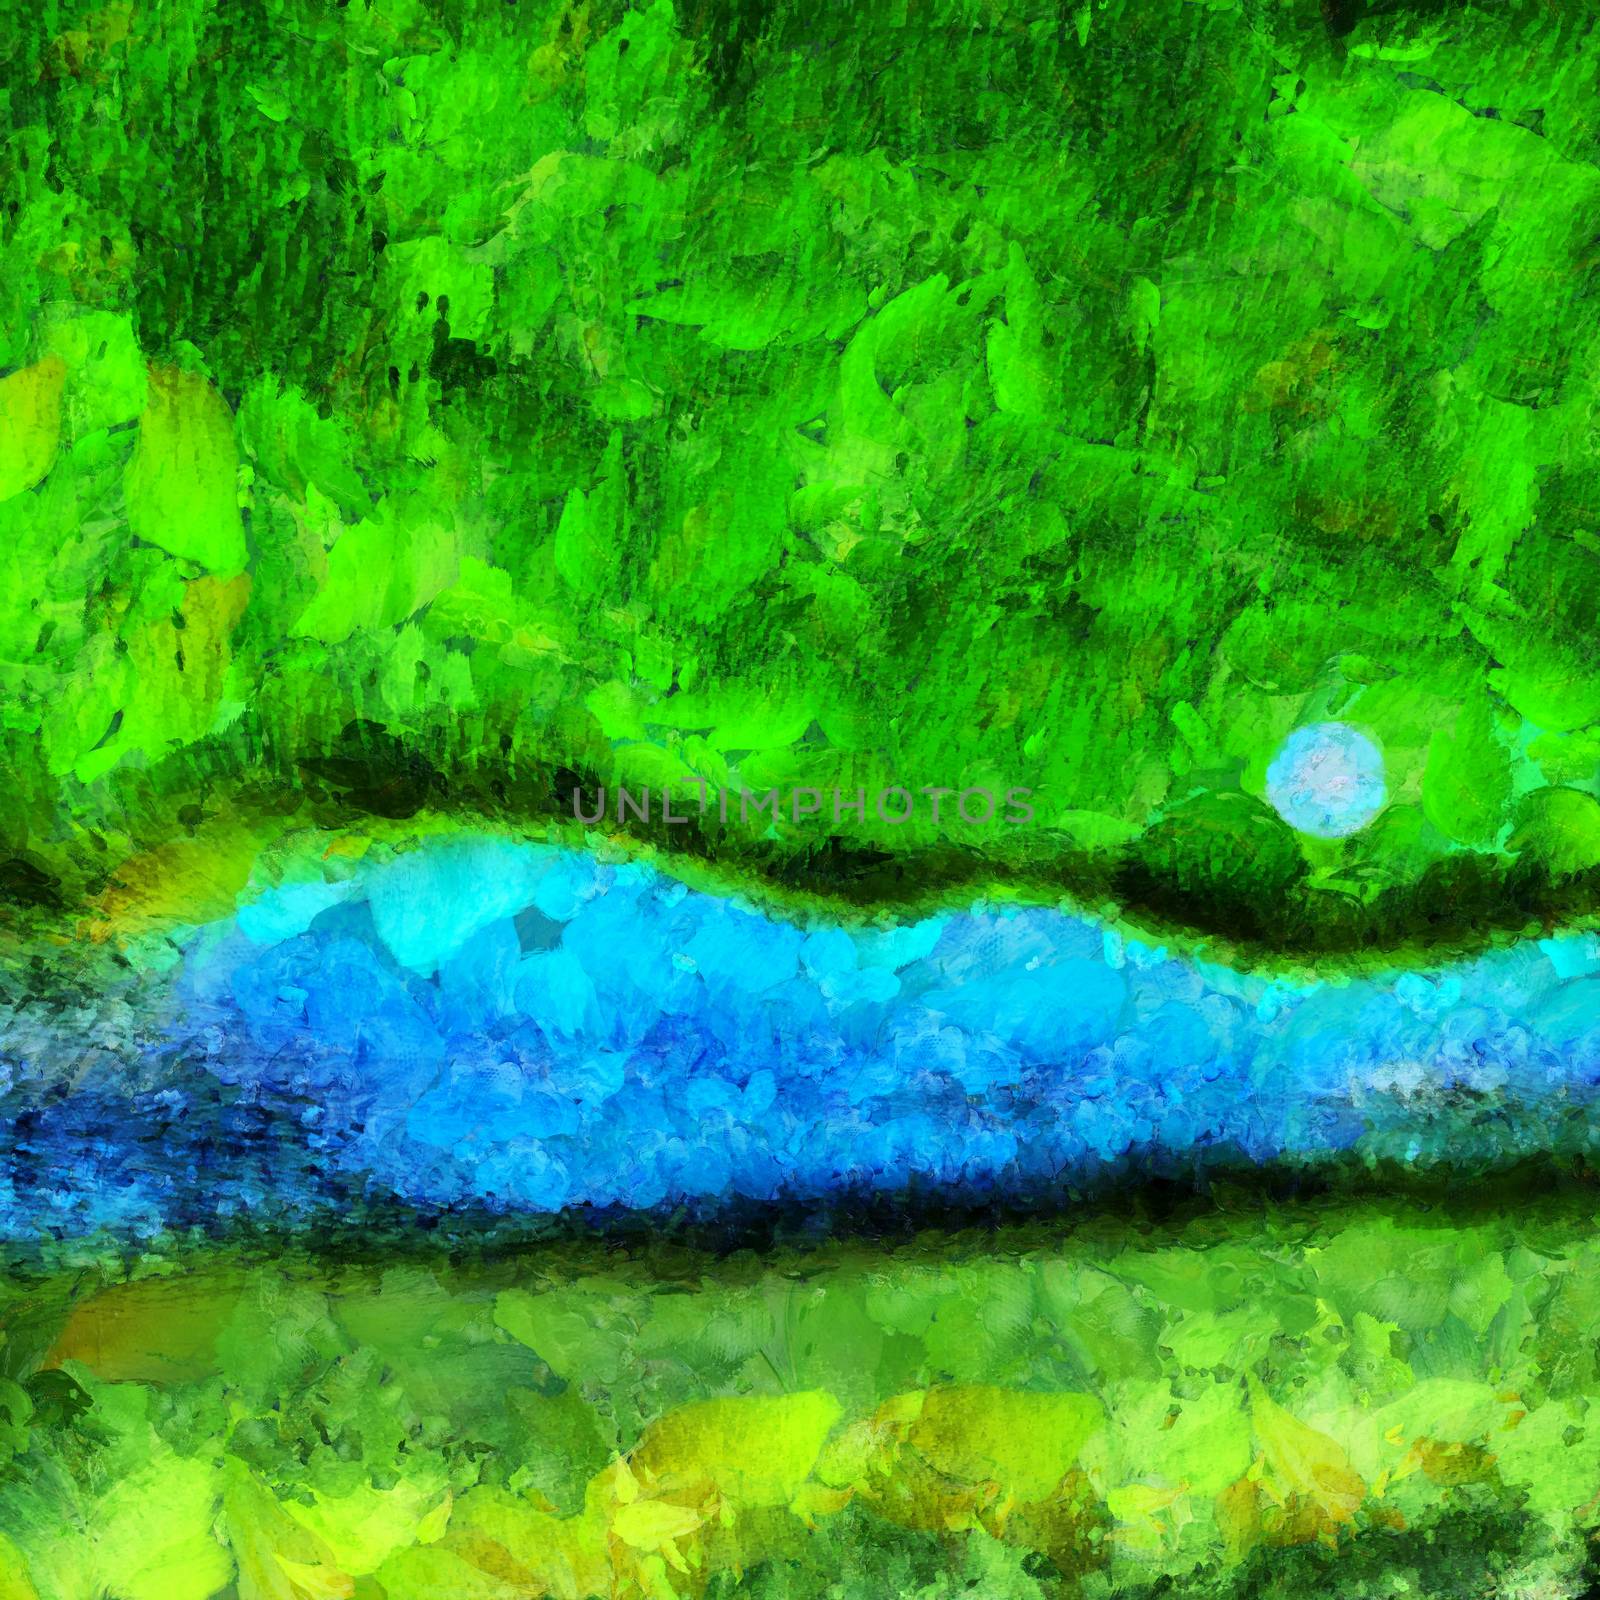 Abstract painting in green and blue colors. The River